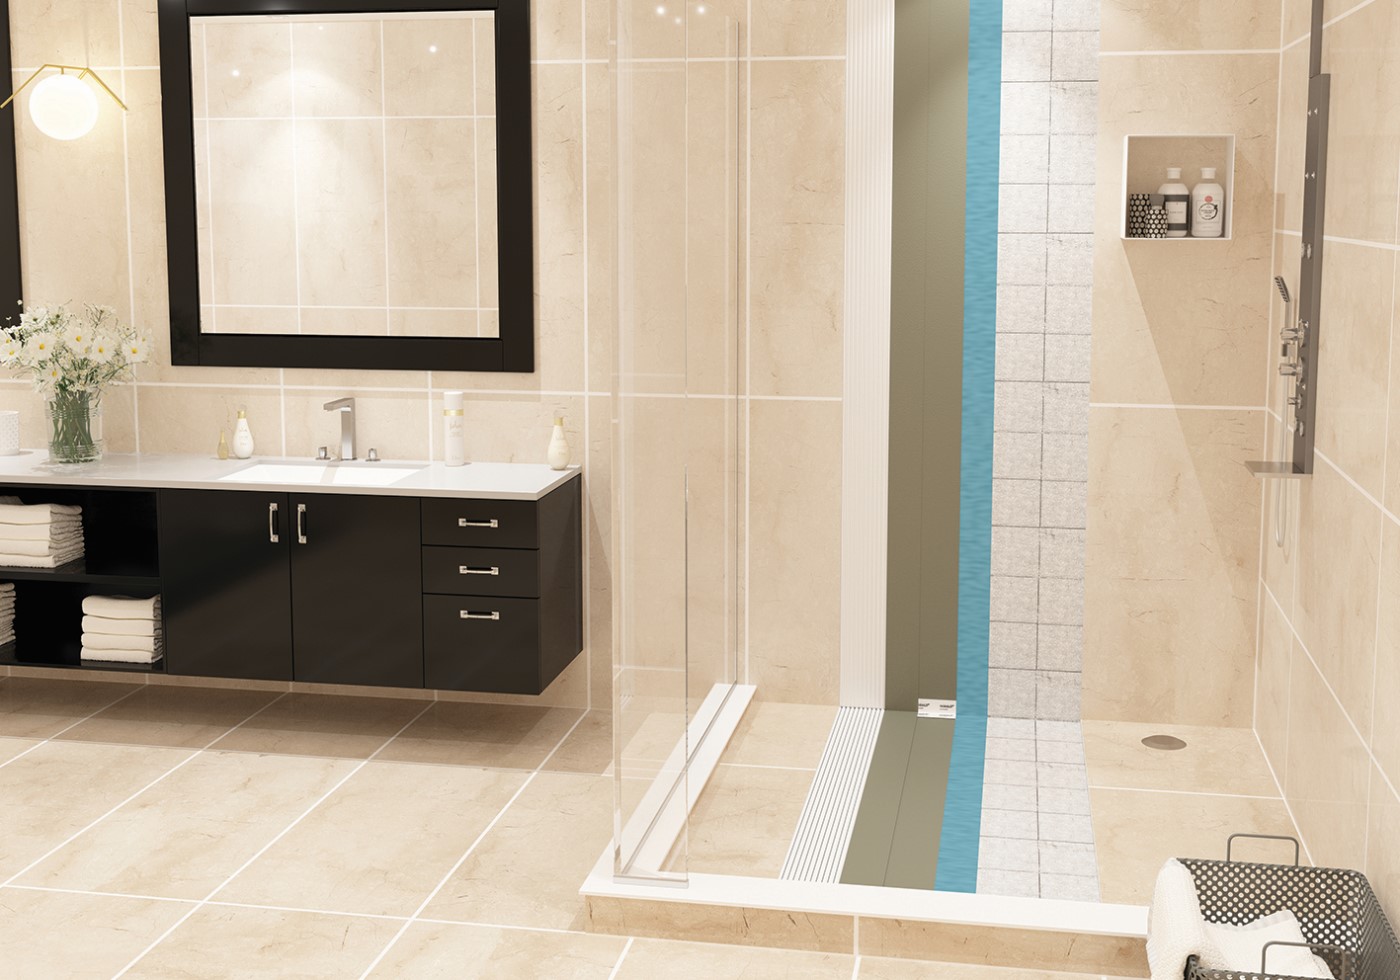 Solutions for Waterproofing & Ceramic Tile Application on Existing Tiles